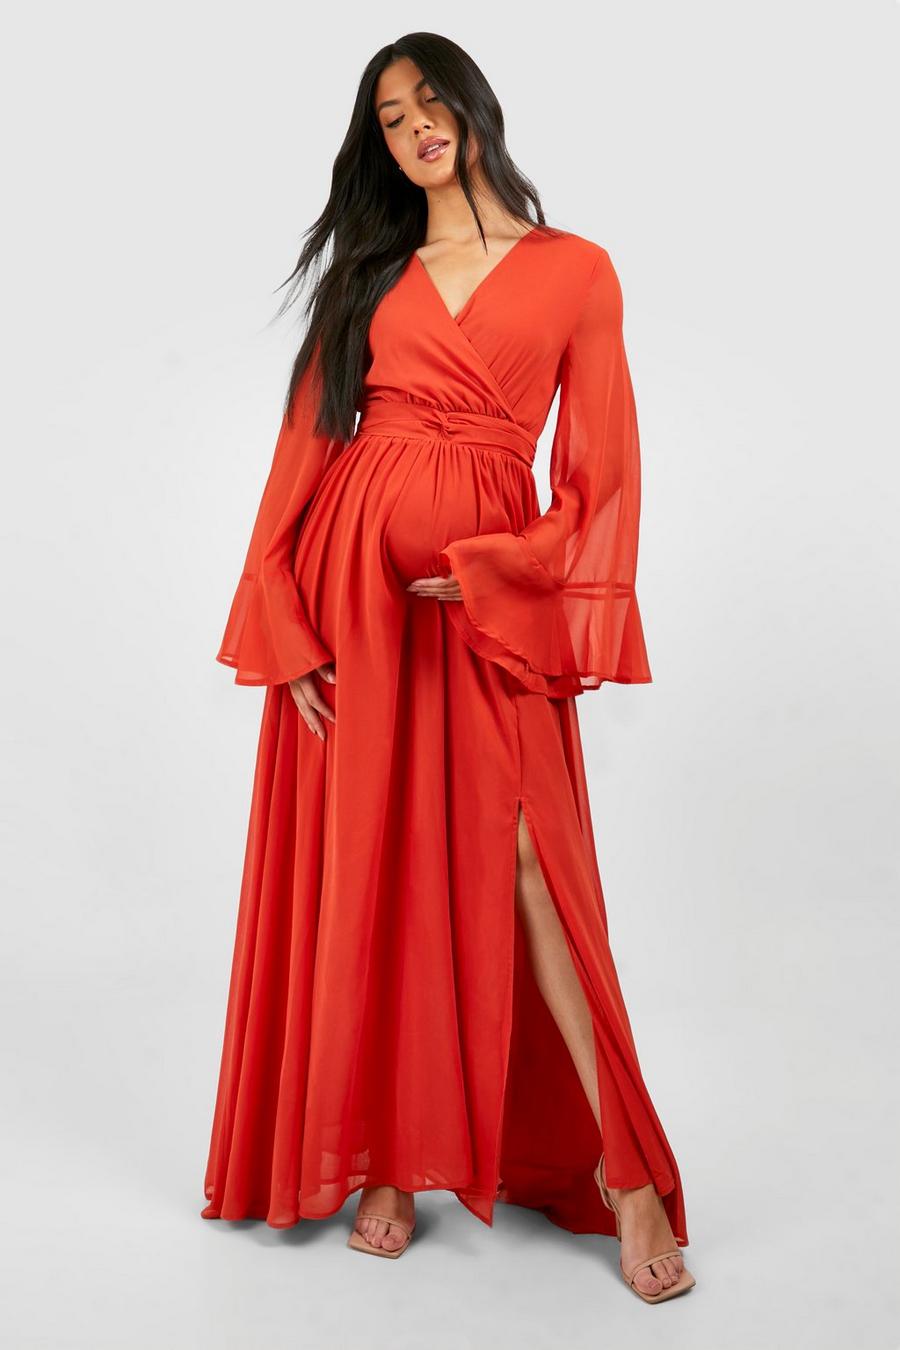 Coral All Occasion Wear